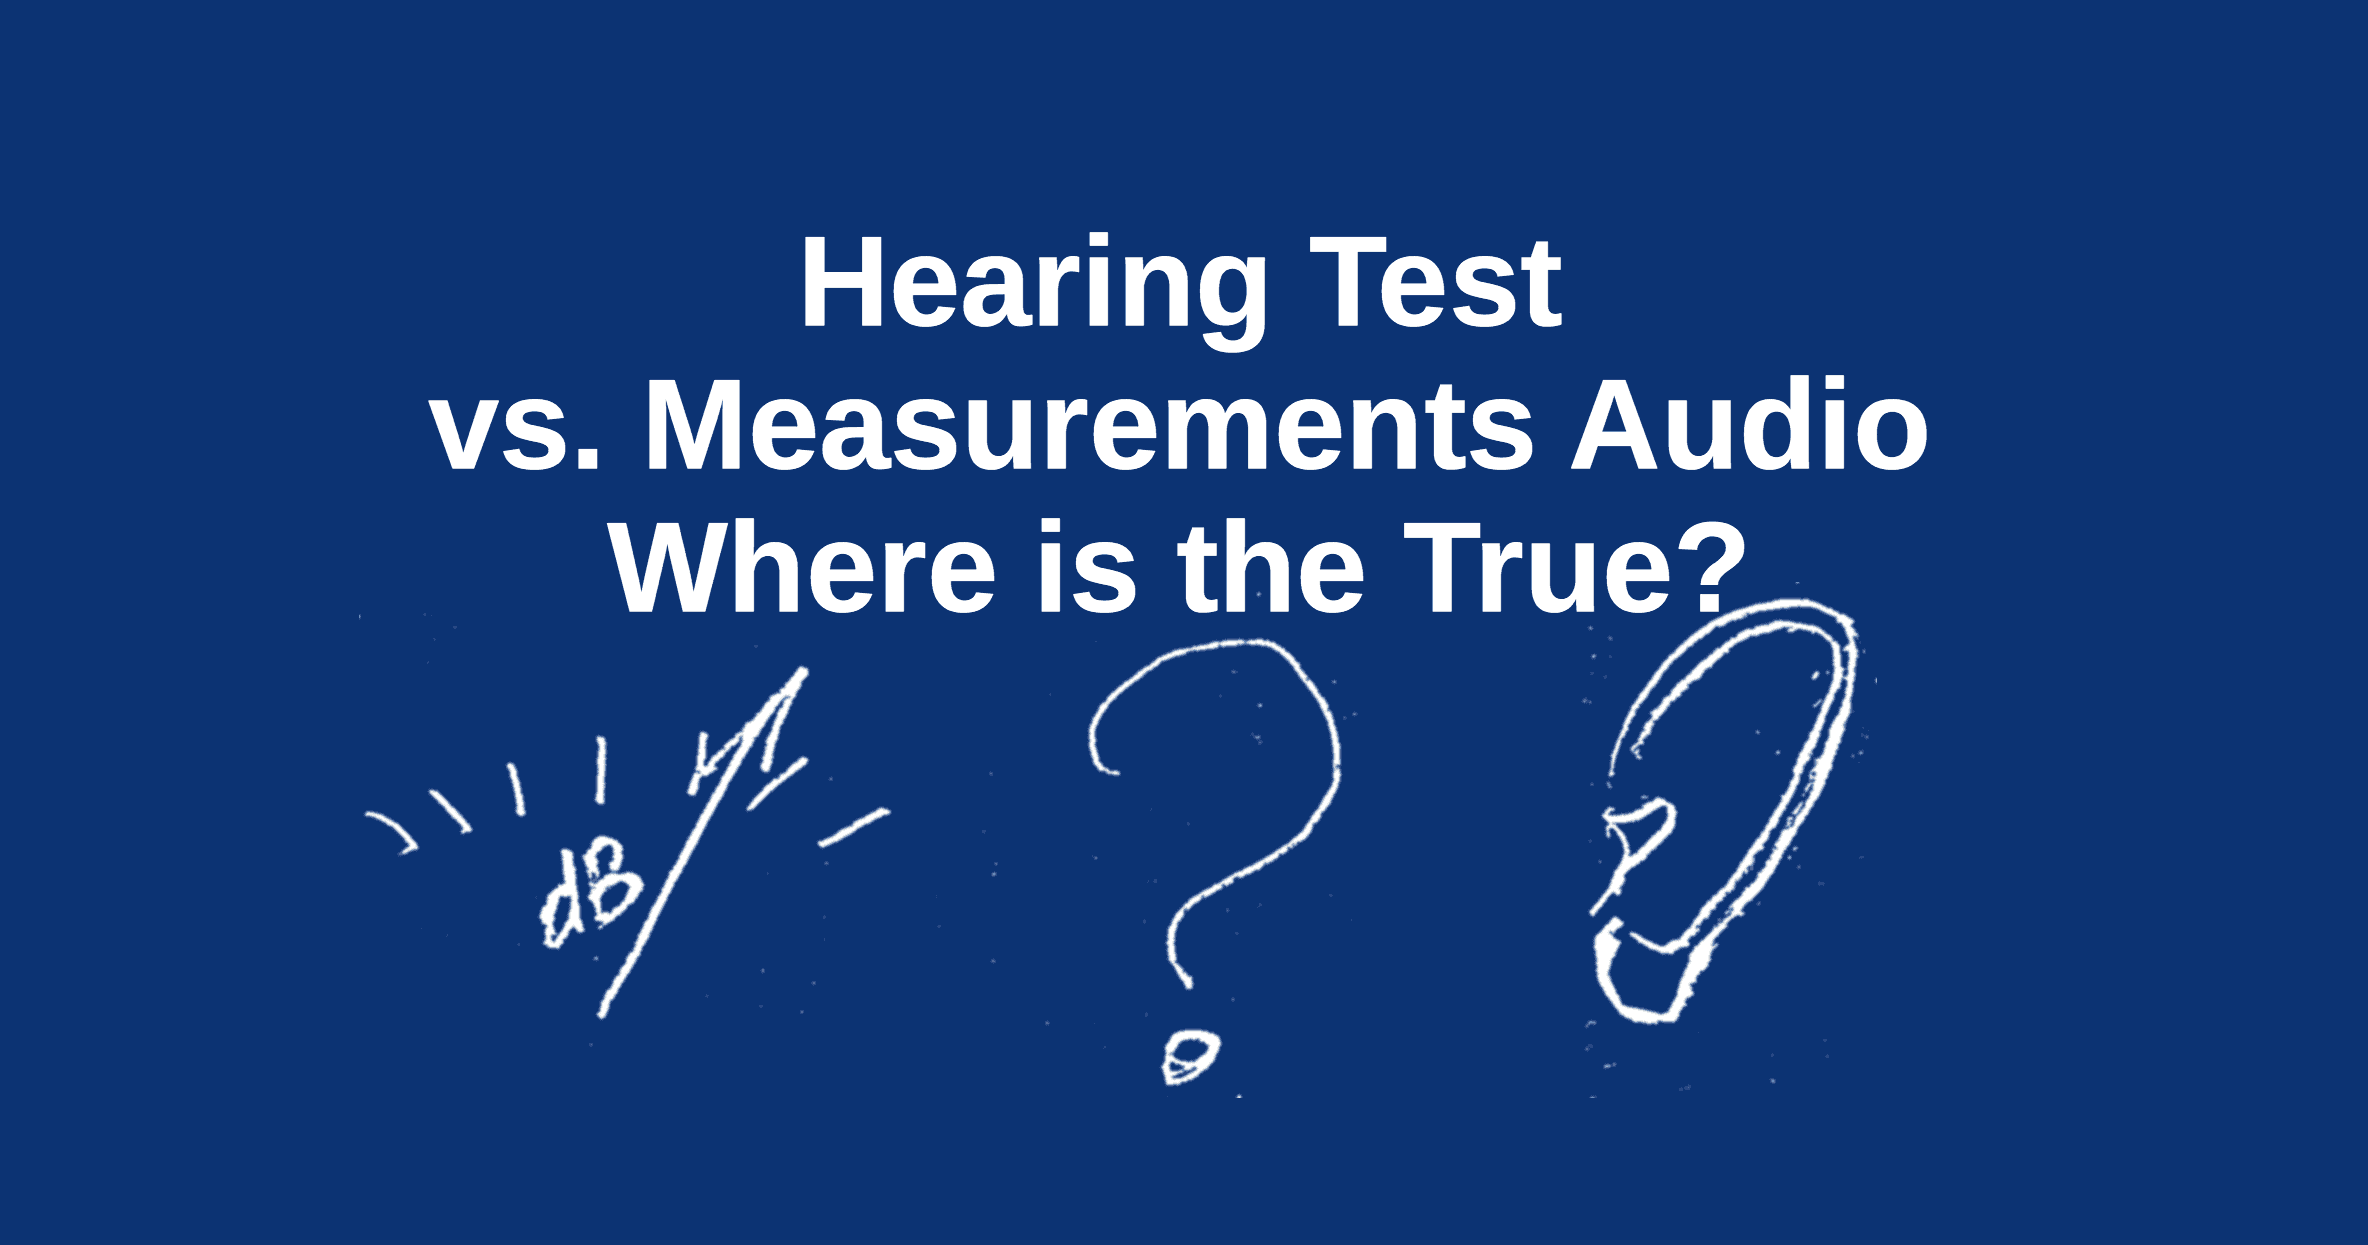 Hearing Test vs. Measurements Audio. Where is the True?